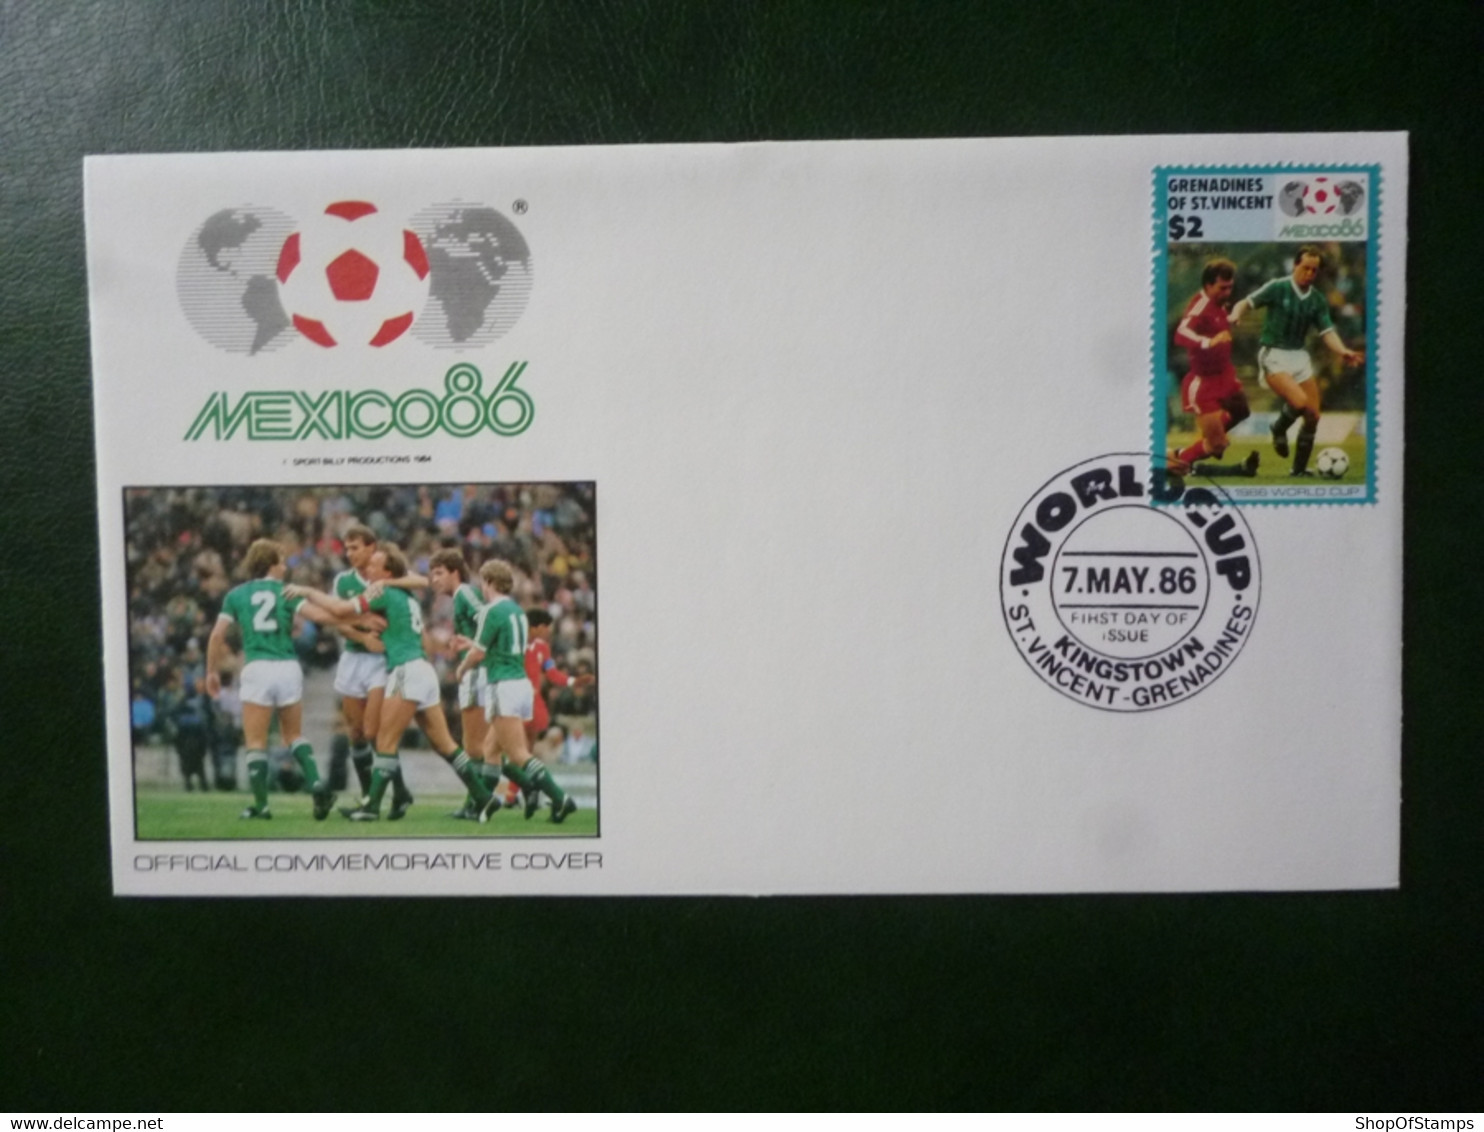 GRENADINES OF ST VINCENT 1986 MEXICO FOOTBALL WORLD CUP FDC COVER With STAMPS - Ploufragan